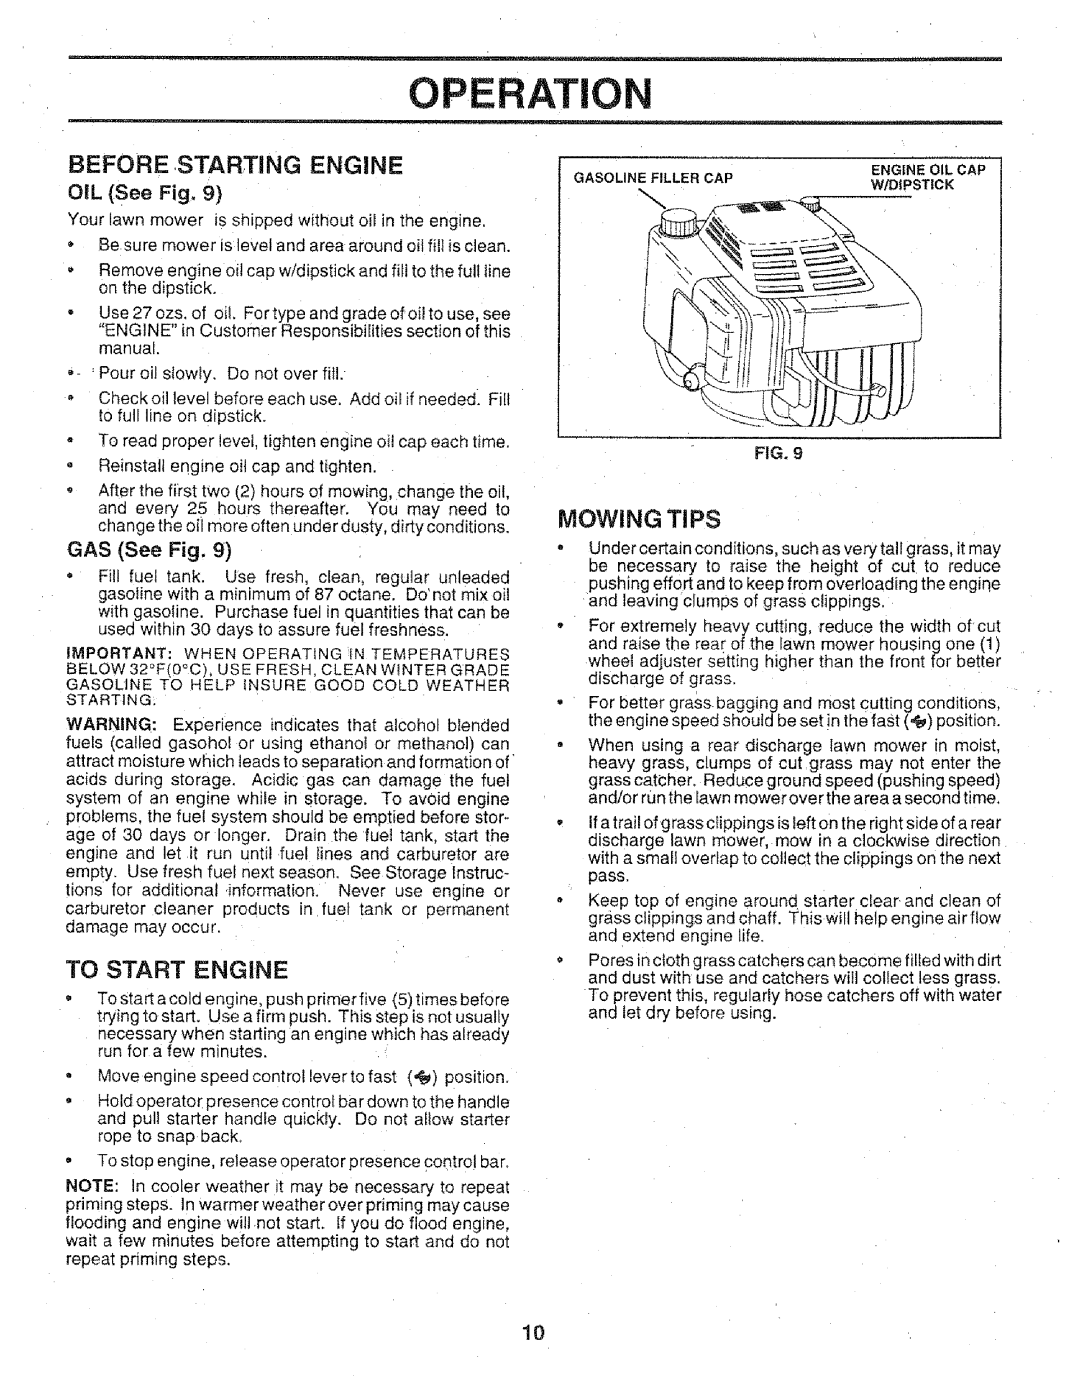 Craftsman 917.3773 manual To Start Engine, Mowing Tips, Before ,Starting Engine, GAS See Fig, OIL See Fig, Operation 